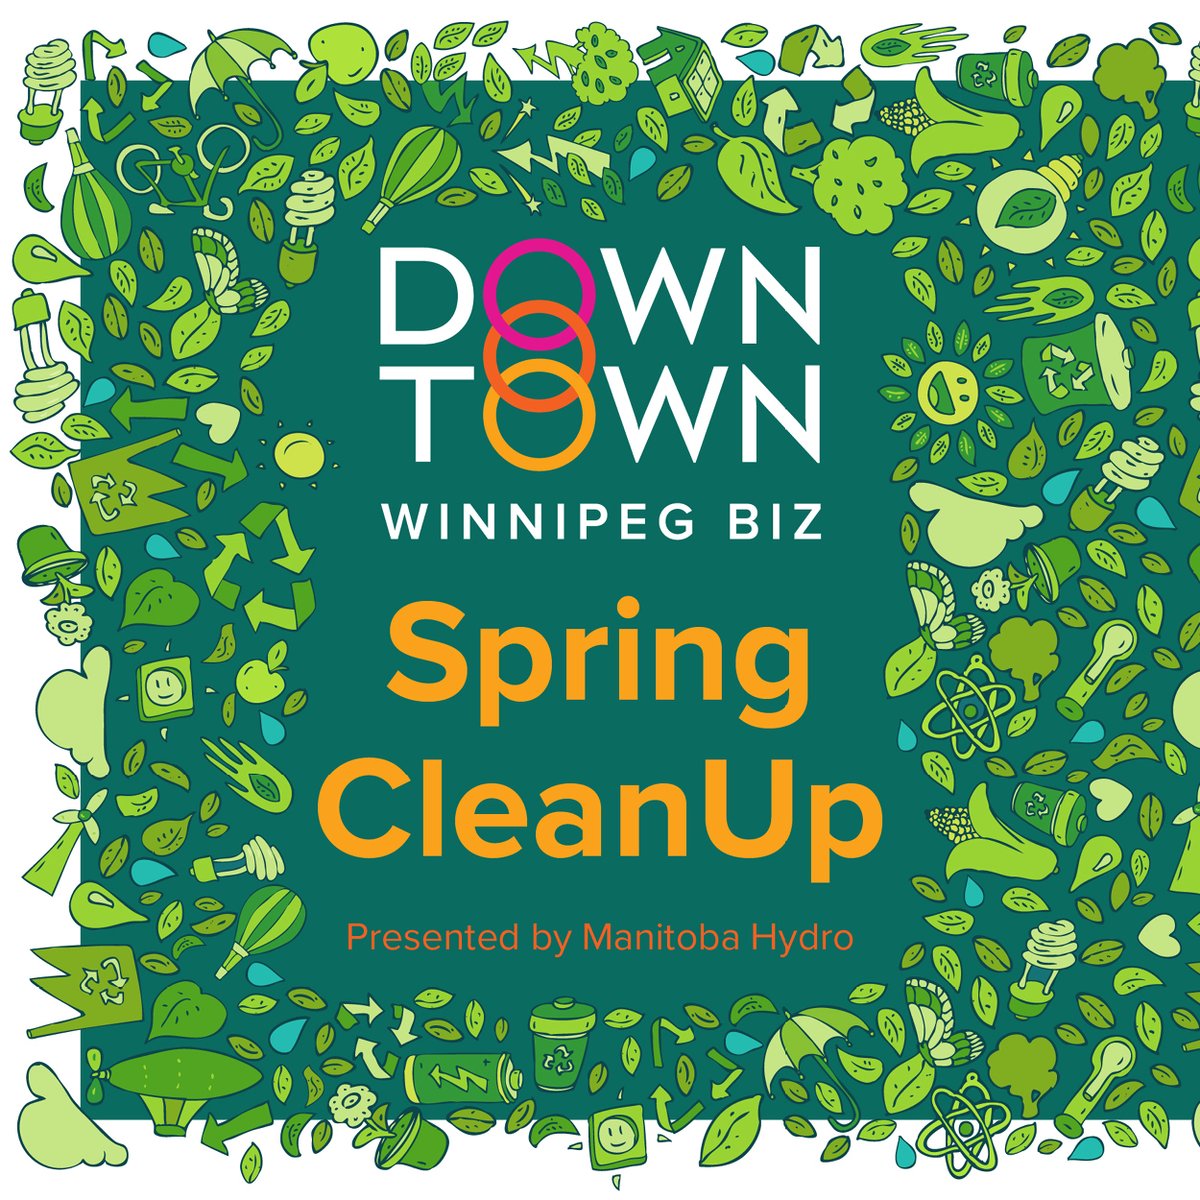 Roll up your sleeves and pick up litter at the annual Spring CleanUp Downtown presented by Manitoba Hydro! 📅 Tues, May 7 ⏱️ 10 a.m. to 12 p.m. Meetup 📍: Manitoba Hydro Place REGISTER HERE: ➡️ bit.ly/43NSRZm ⬅️